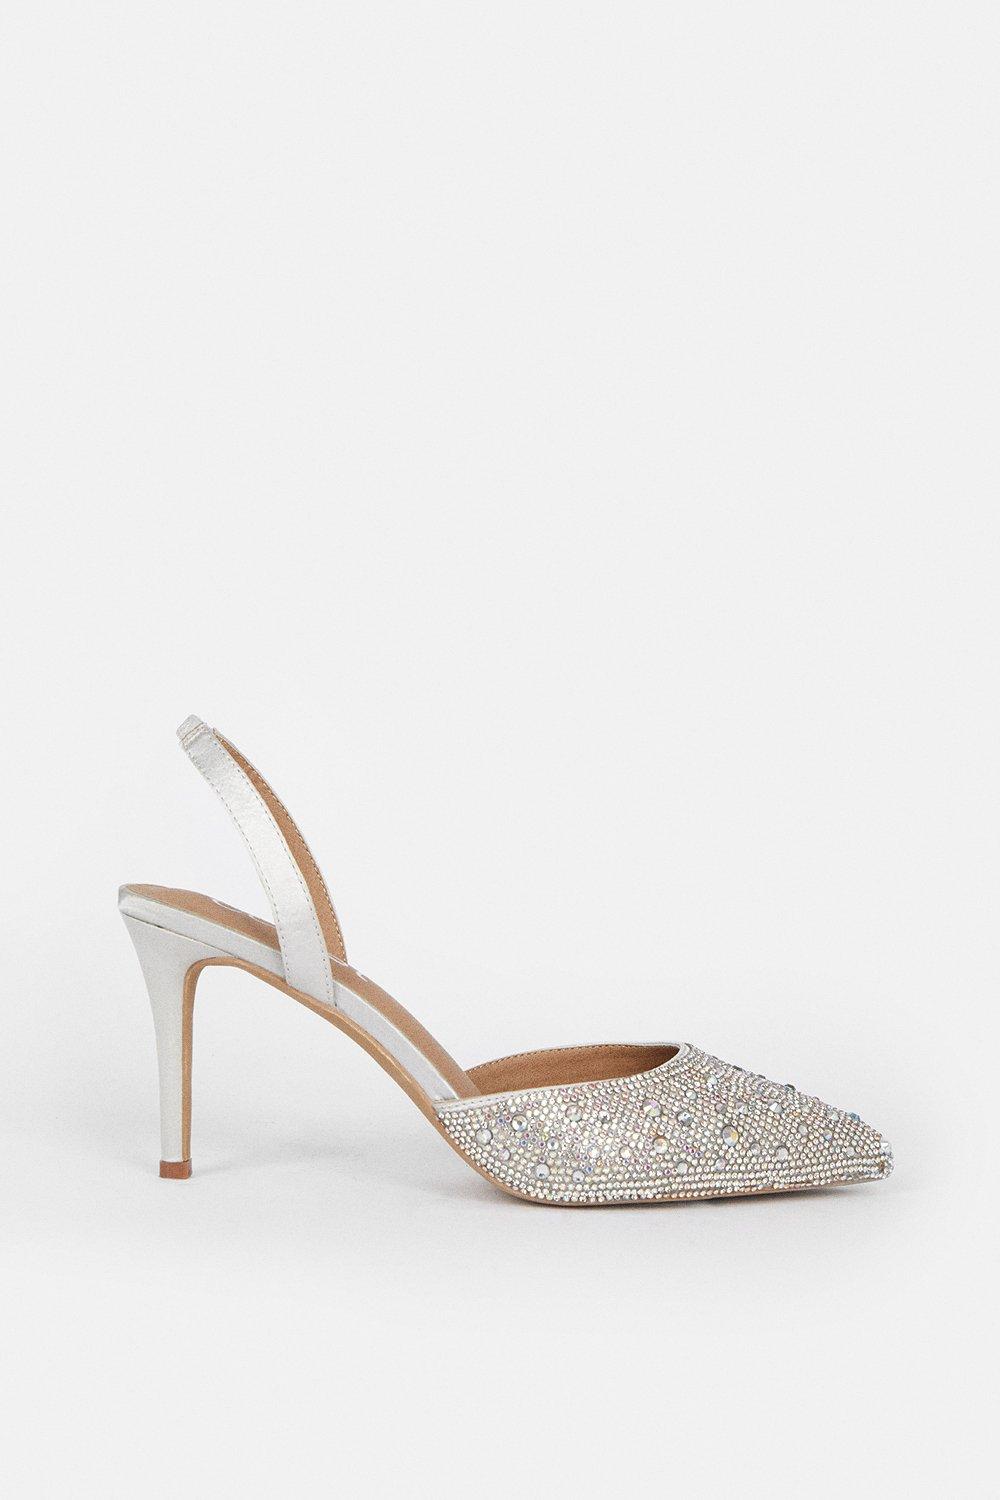 Satin Diamante Sling Back Court Shoes - Silver